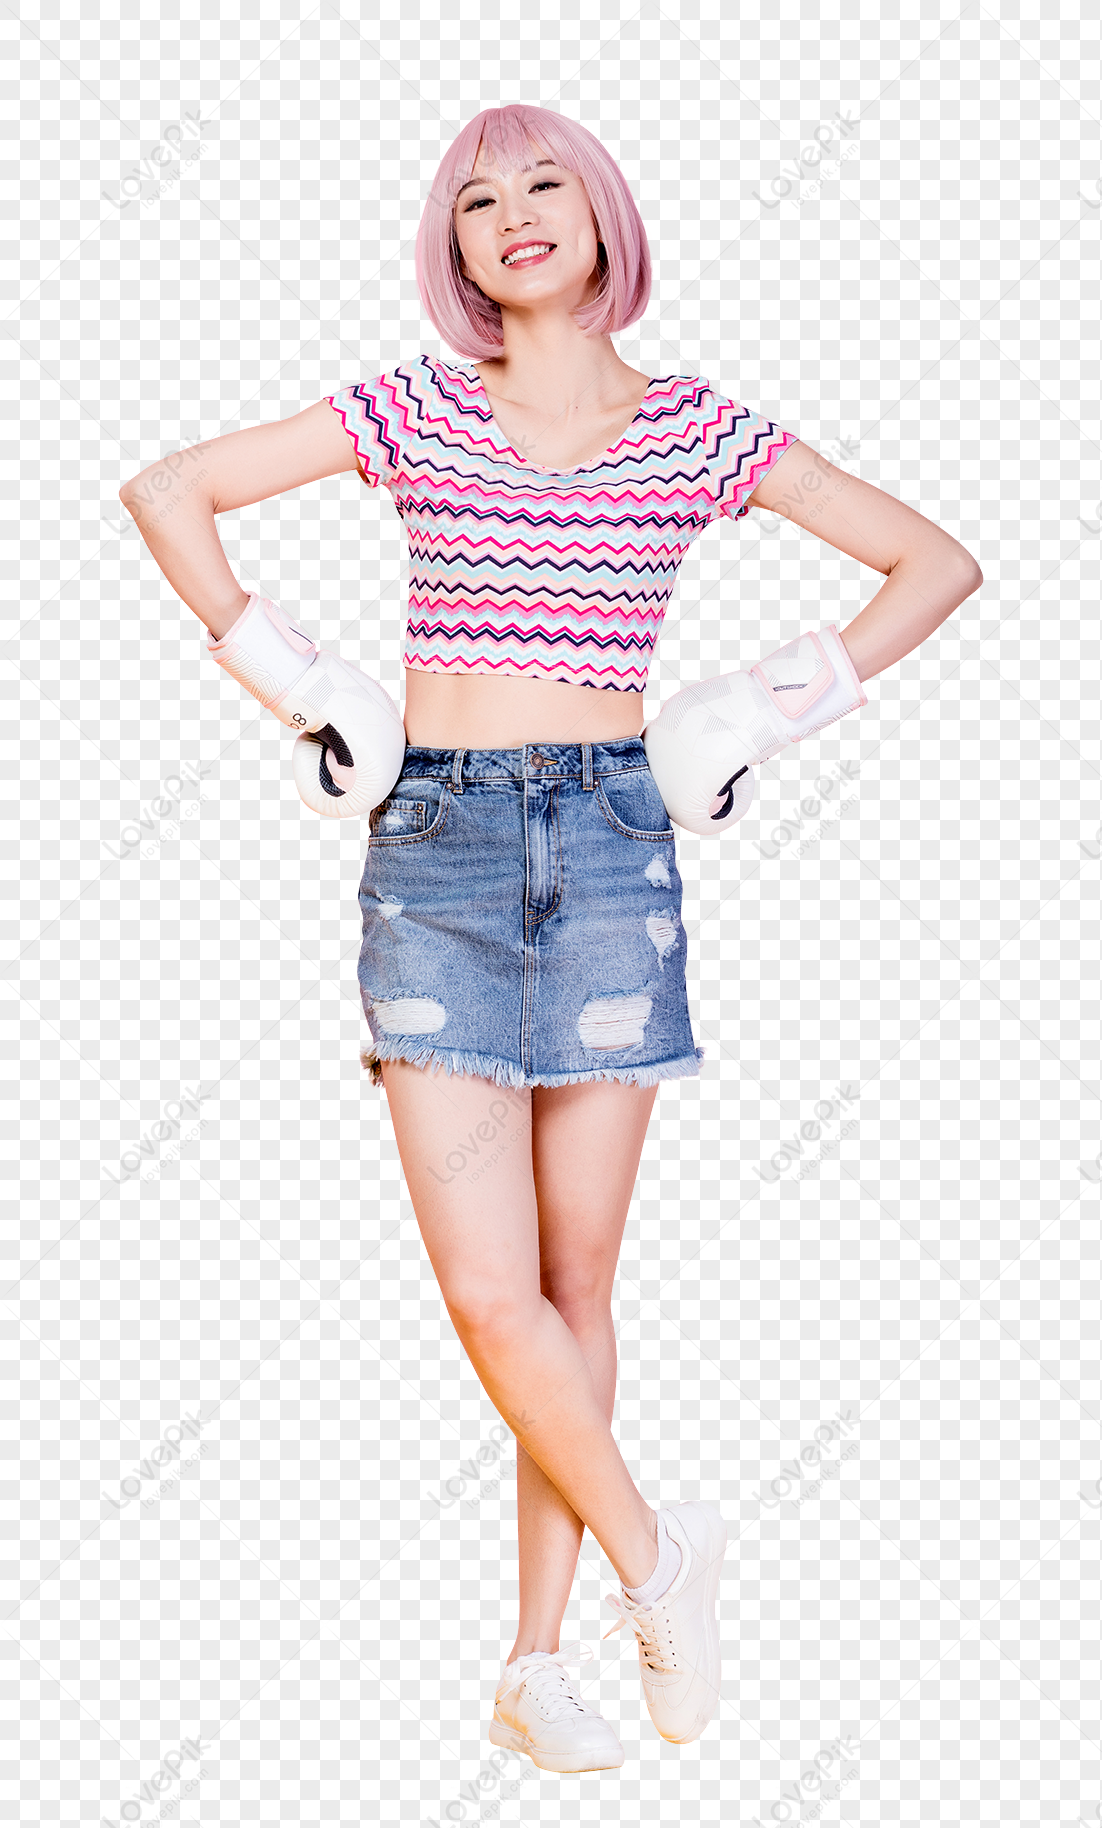 Fashionable Women With Boxing Gloves PNG Picture And Clipart Image For ...